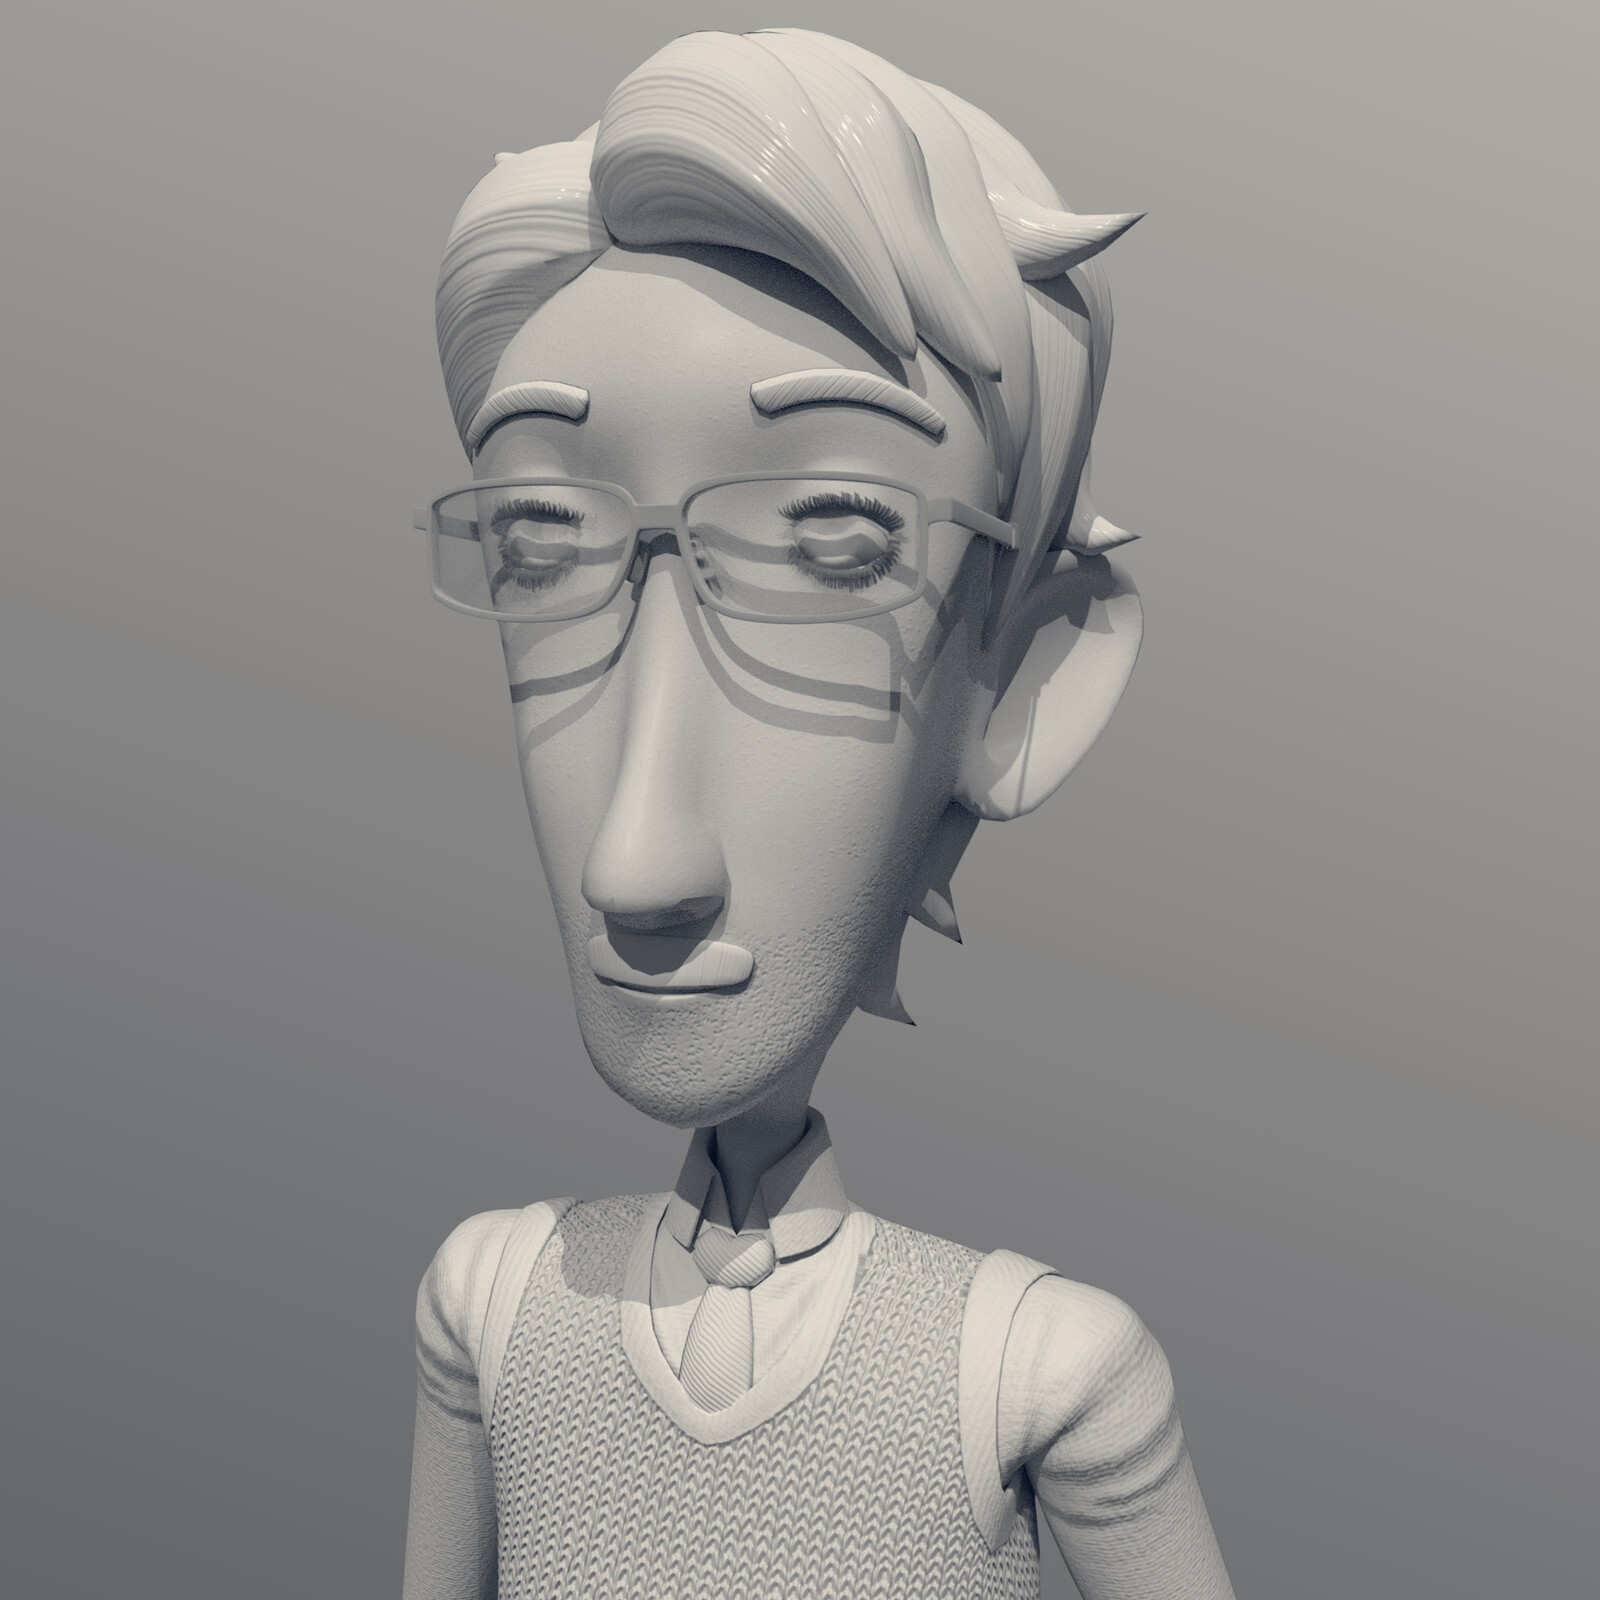 Barry the 60's 70's dad husband animated 3d cg character from my "Suburbia" short film.